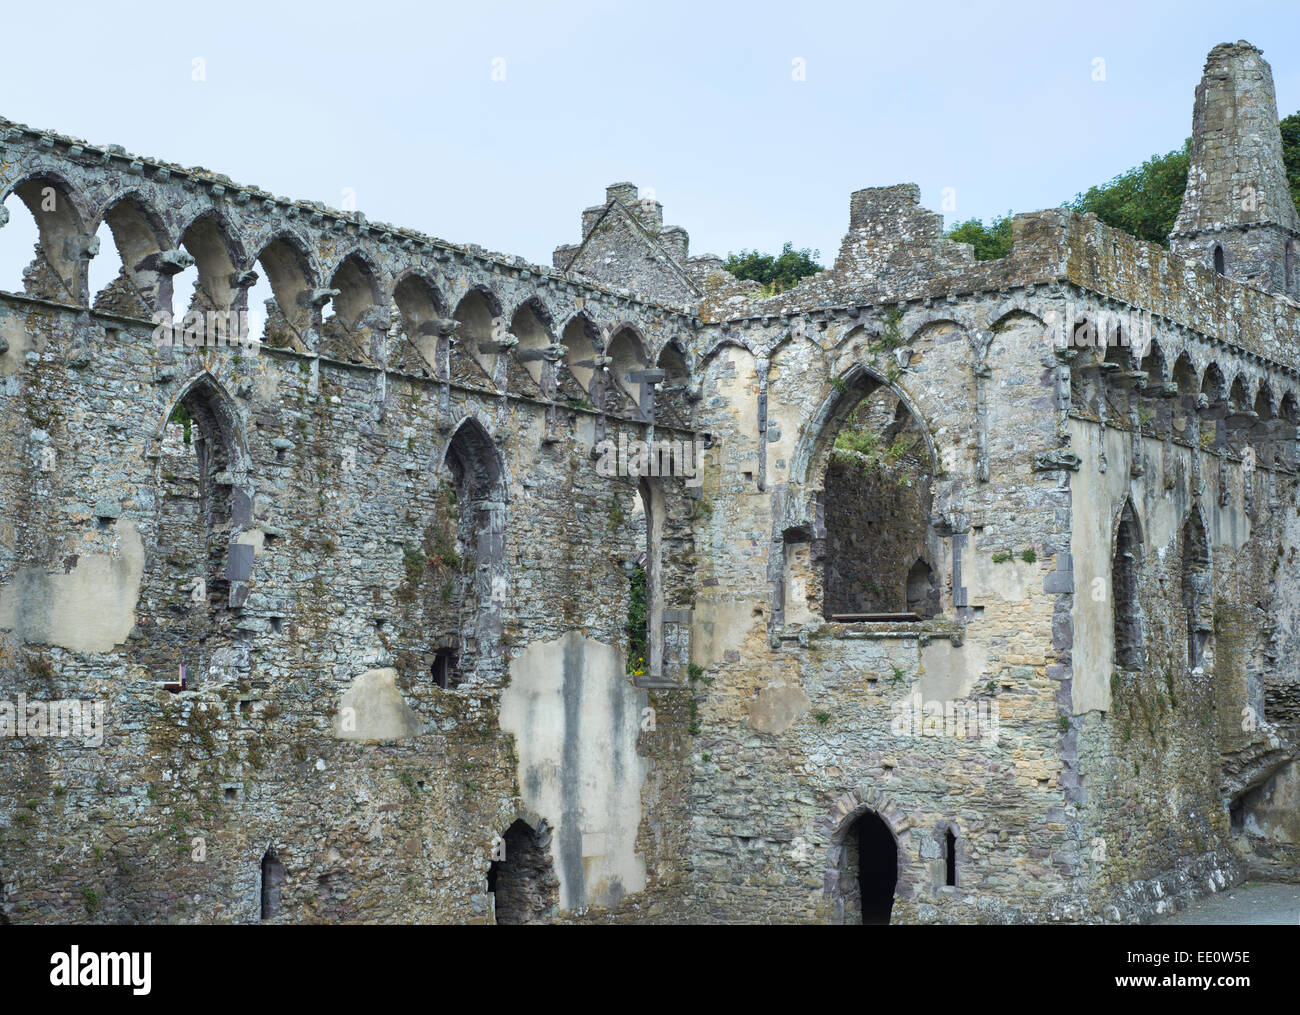 The ruins of St Davids Bishops Palace located adjacent to St Davids Cathedral in the city of St Davids, Wales Stock Photo